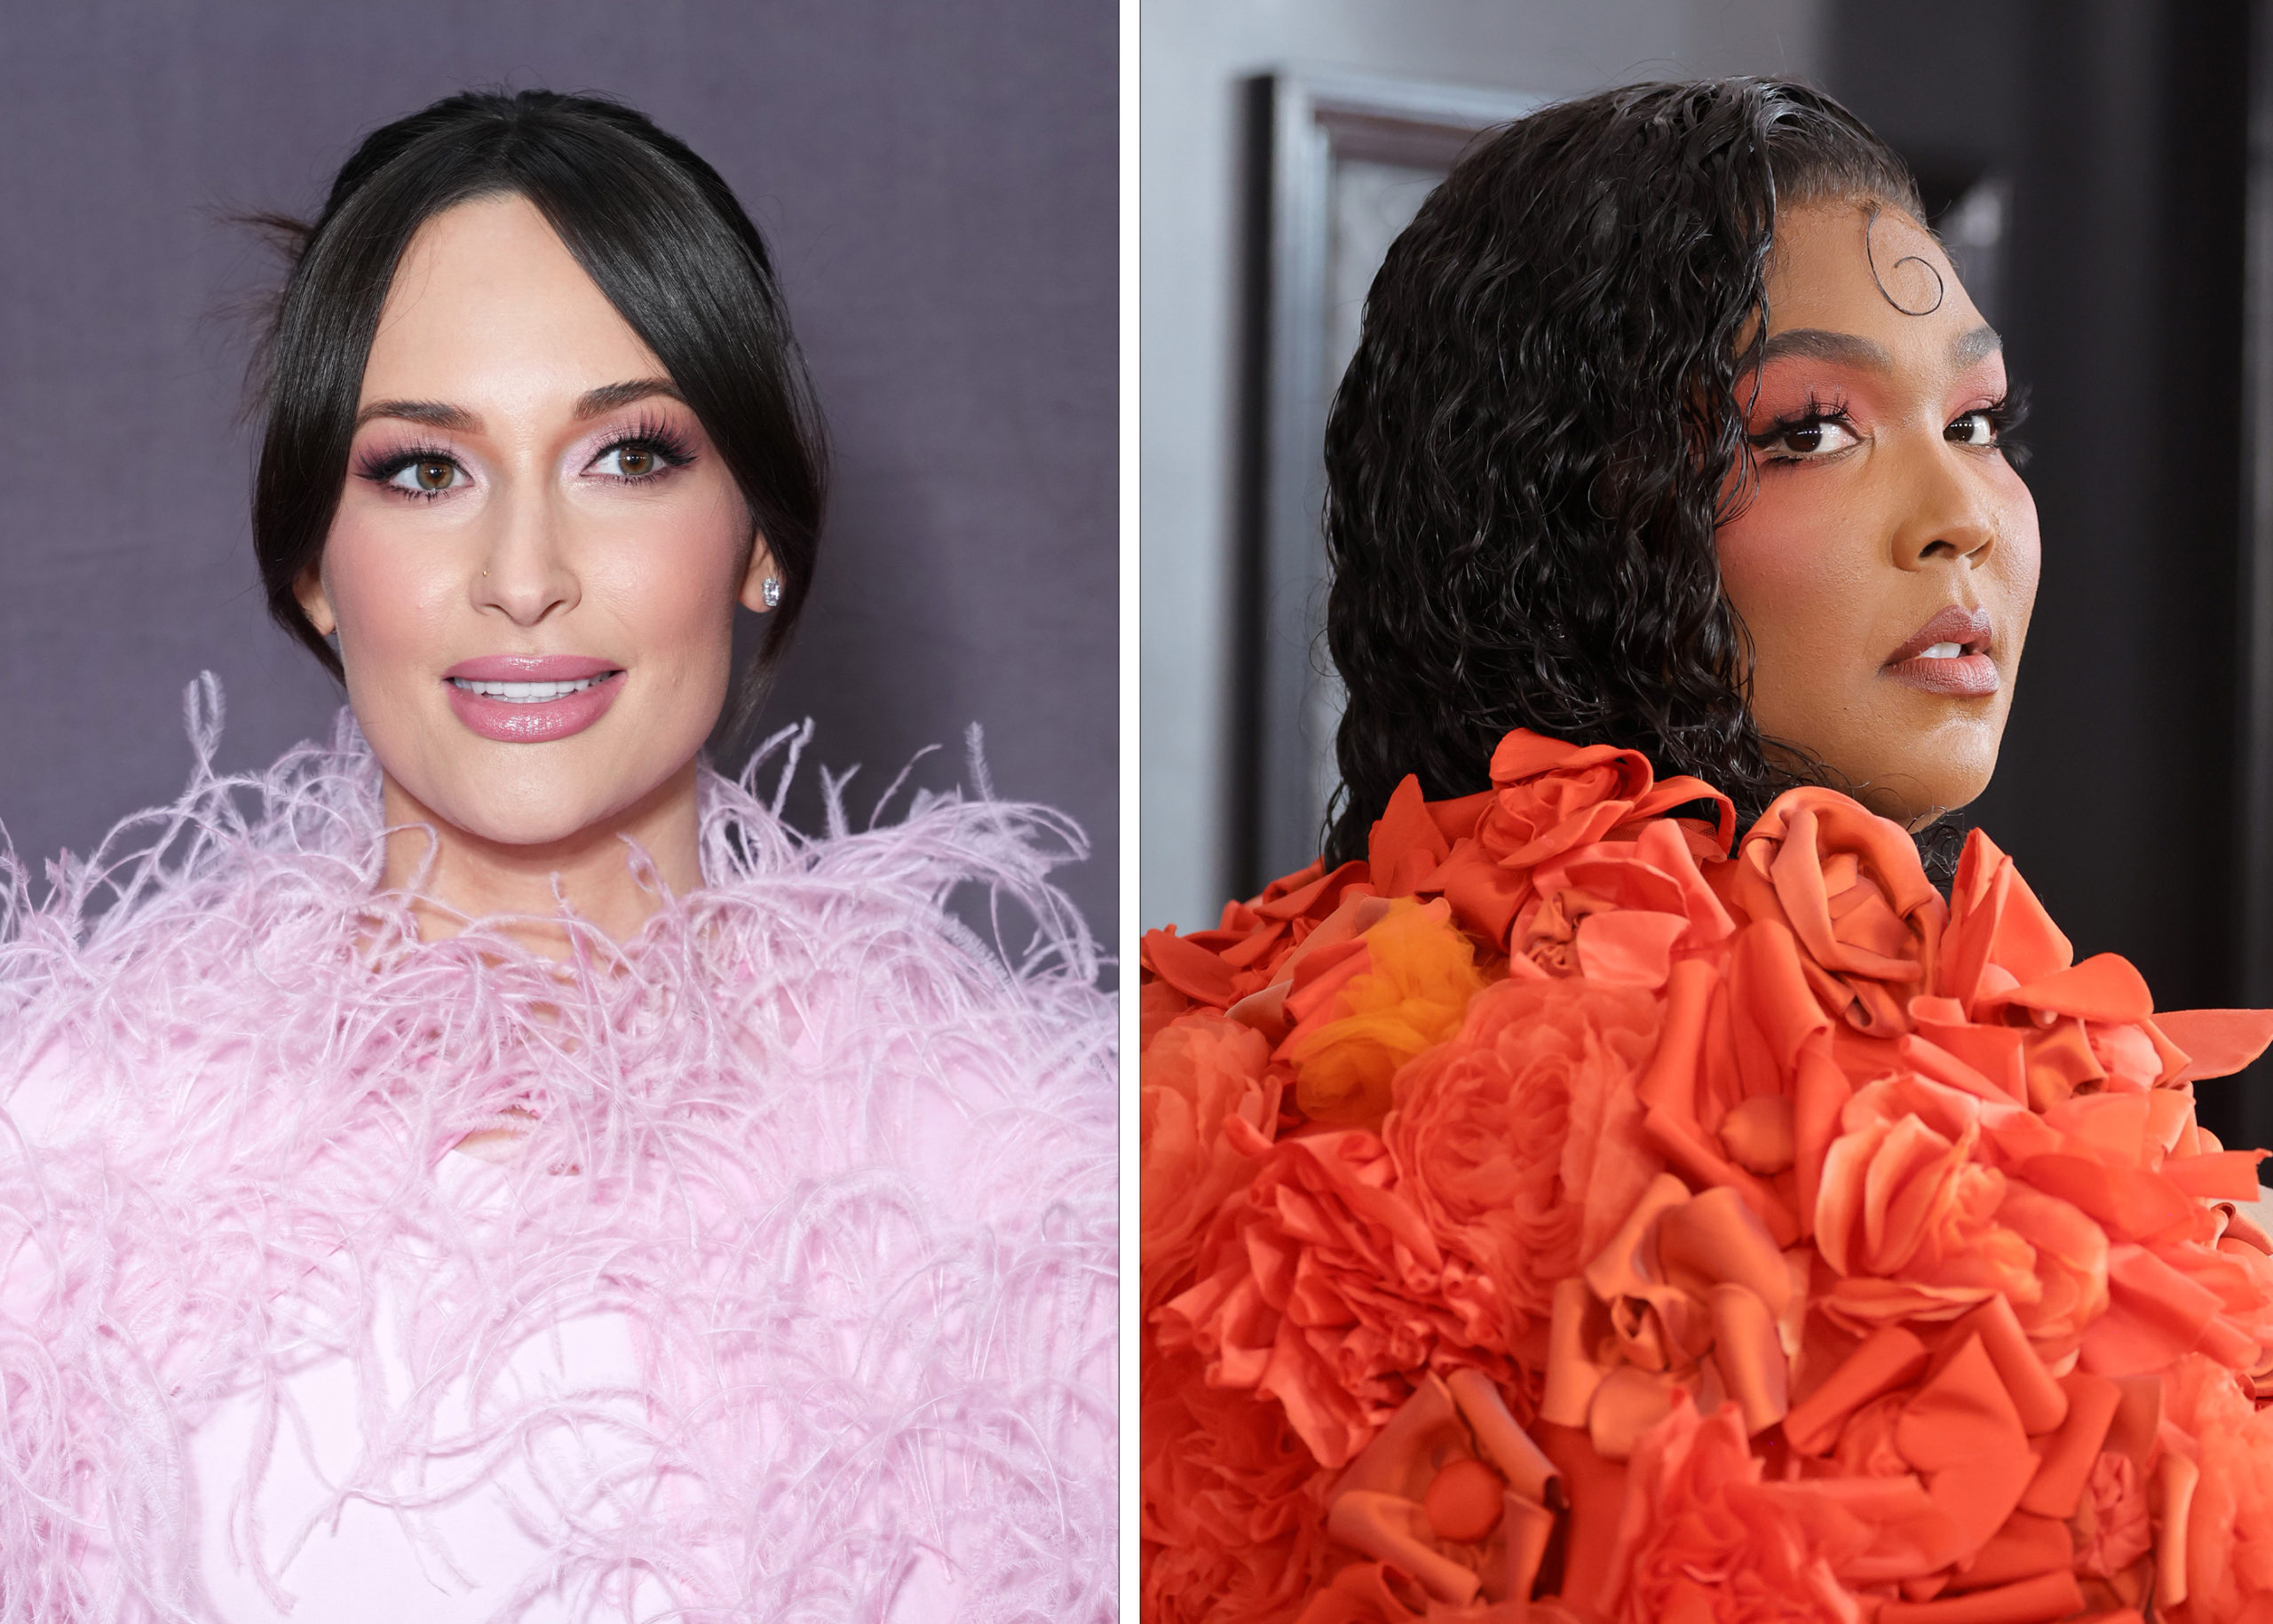 , The Liquid Blush Kacey Musgraves and Lizzo Both Wore to the Grammys